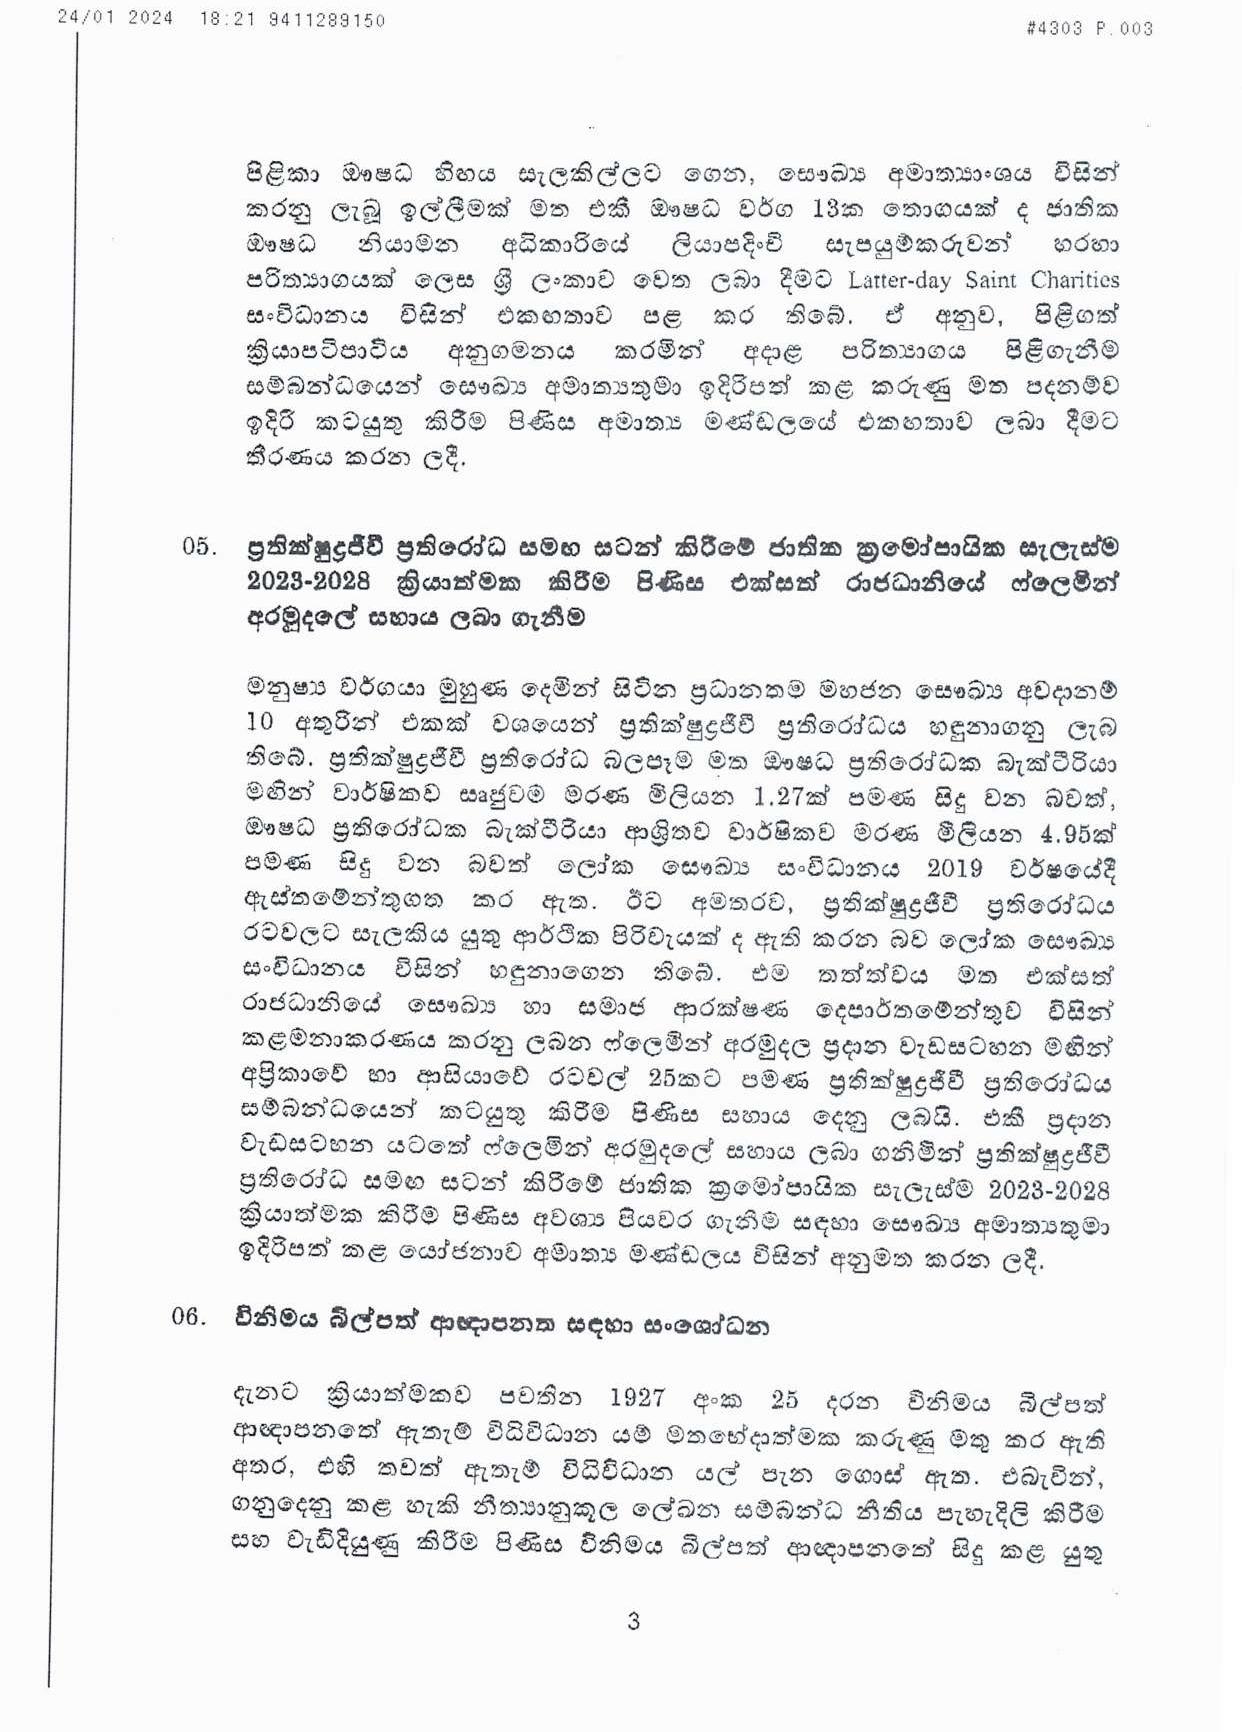 Cabinet Decisions on 24.01.2024 compressed page 003